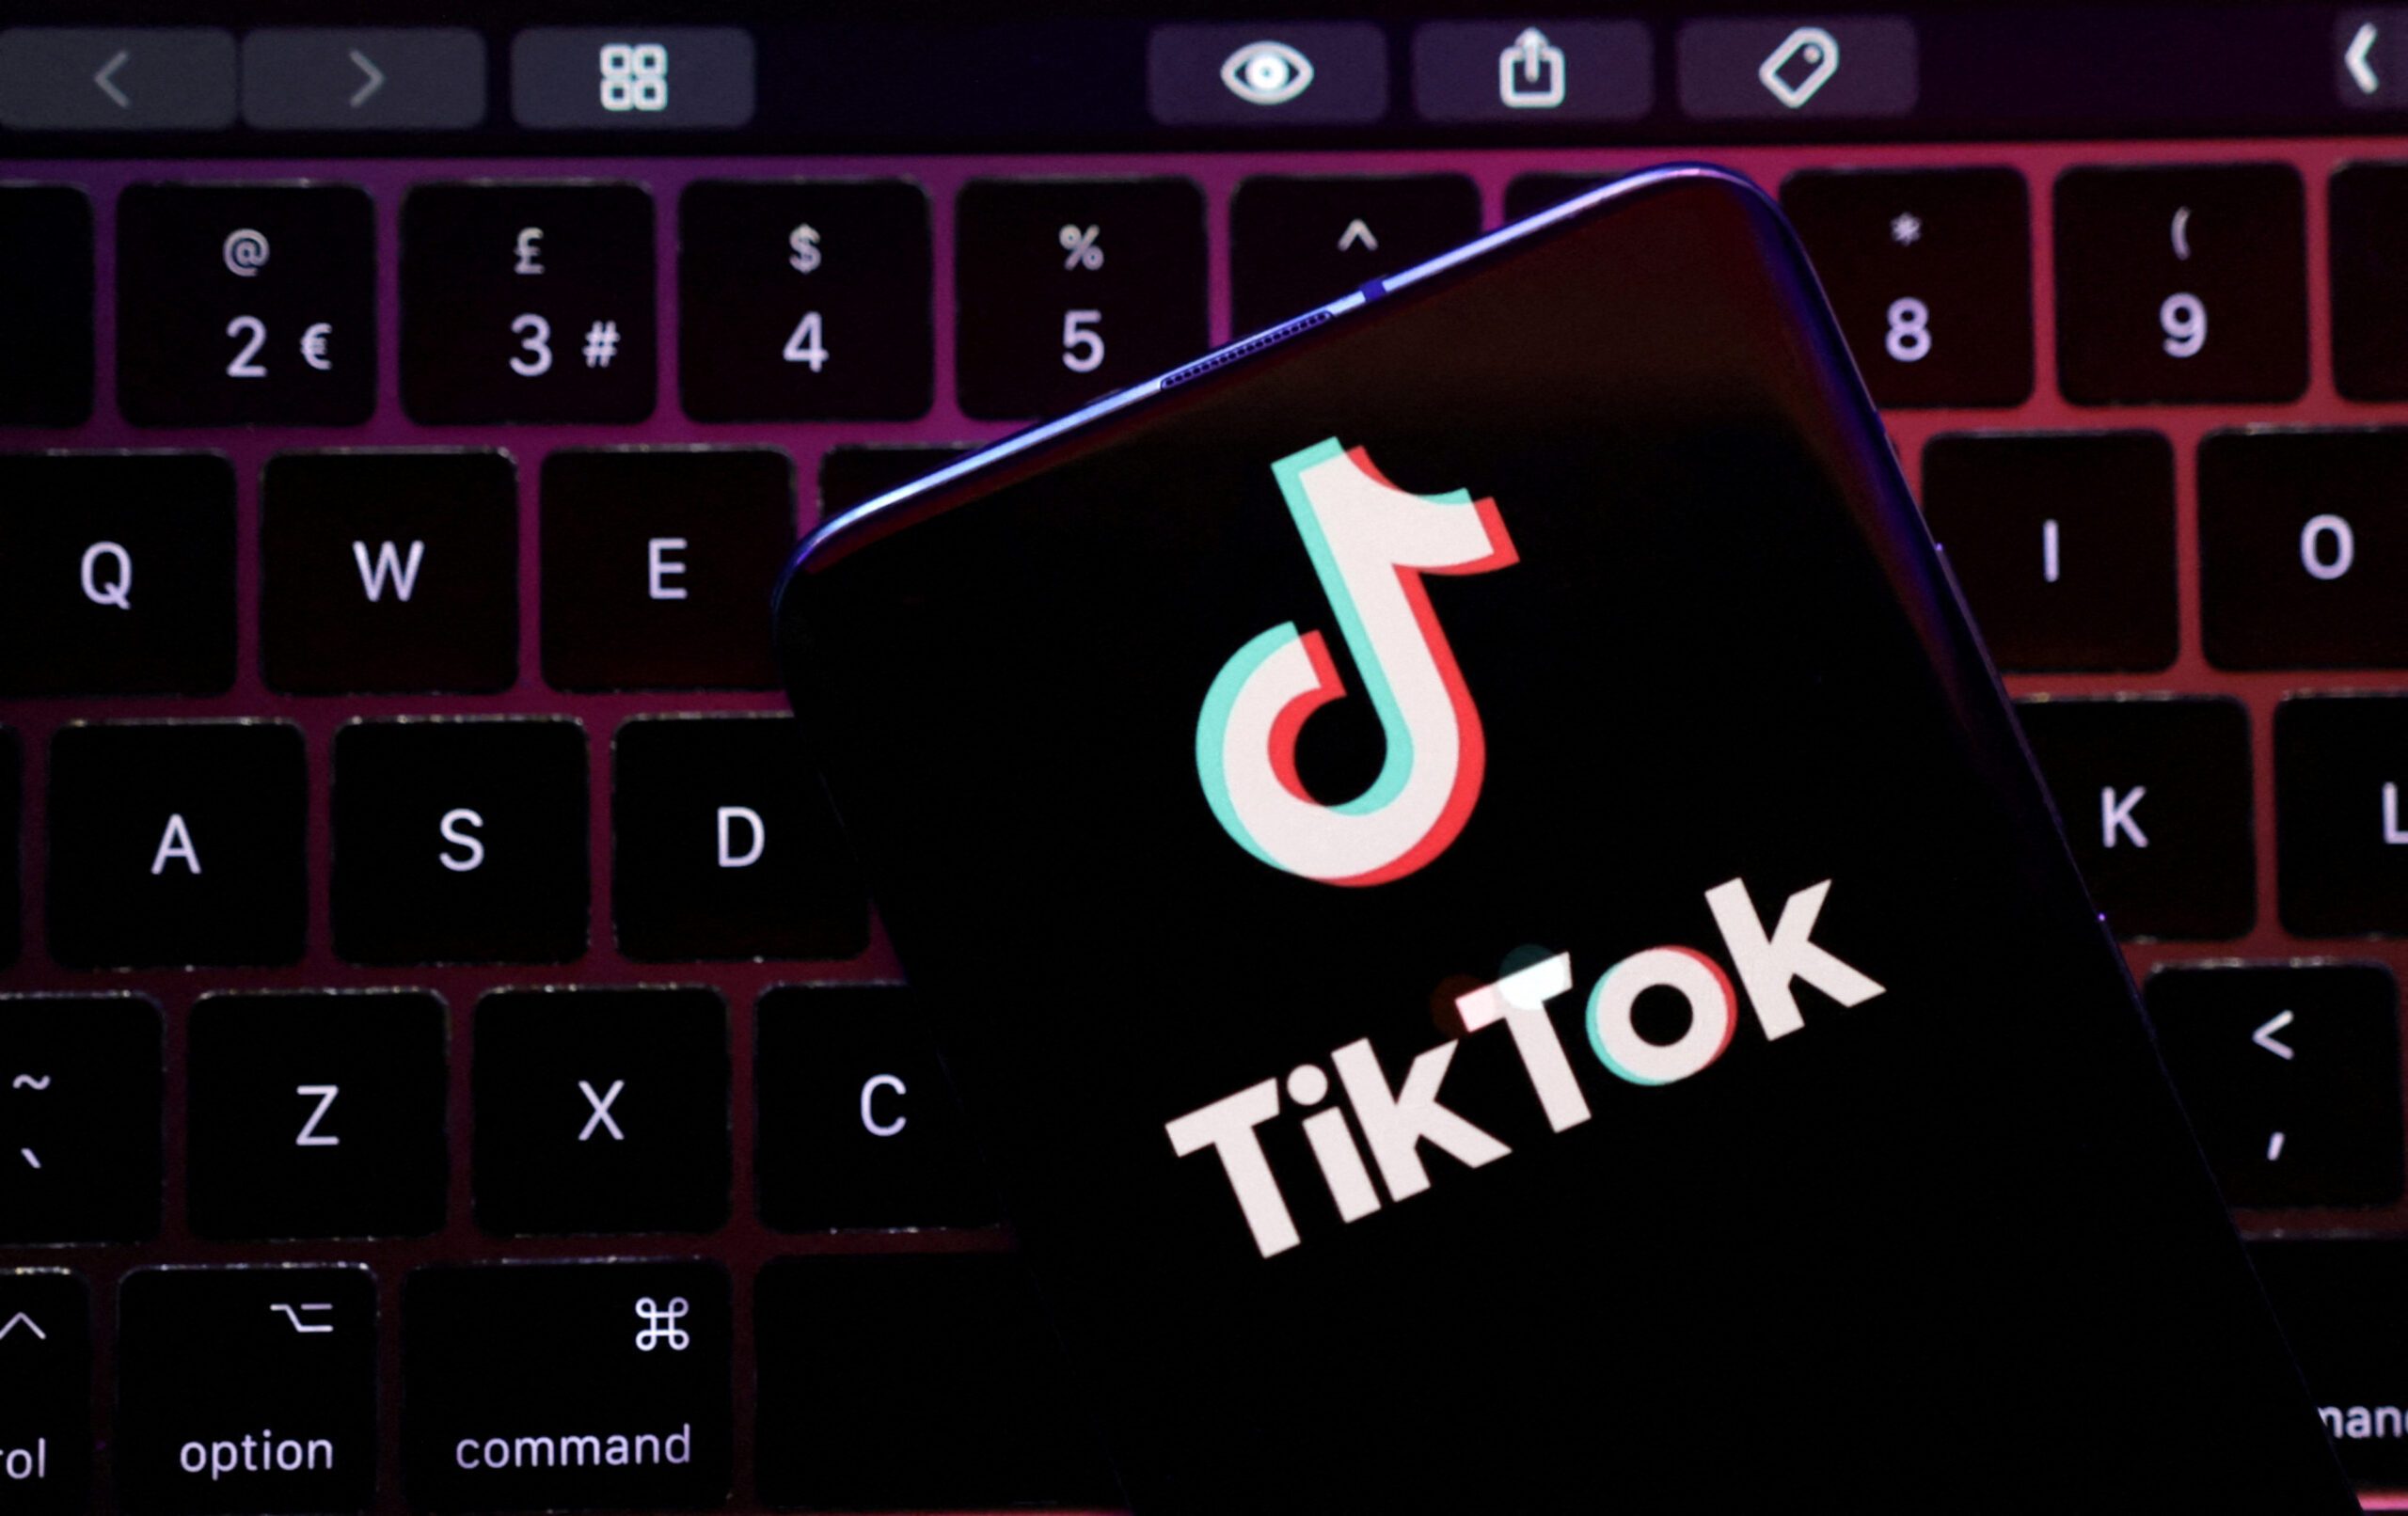 TikTok said to be in the process of getting Indonesia e-commerce permit